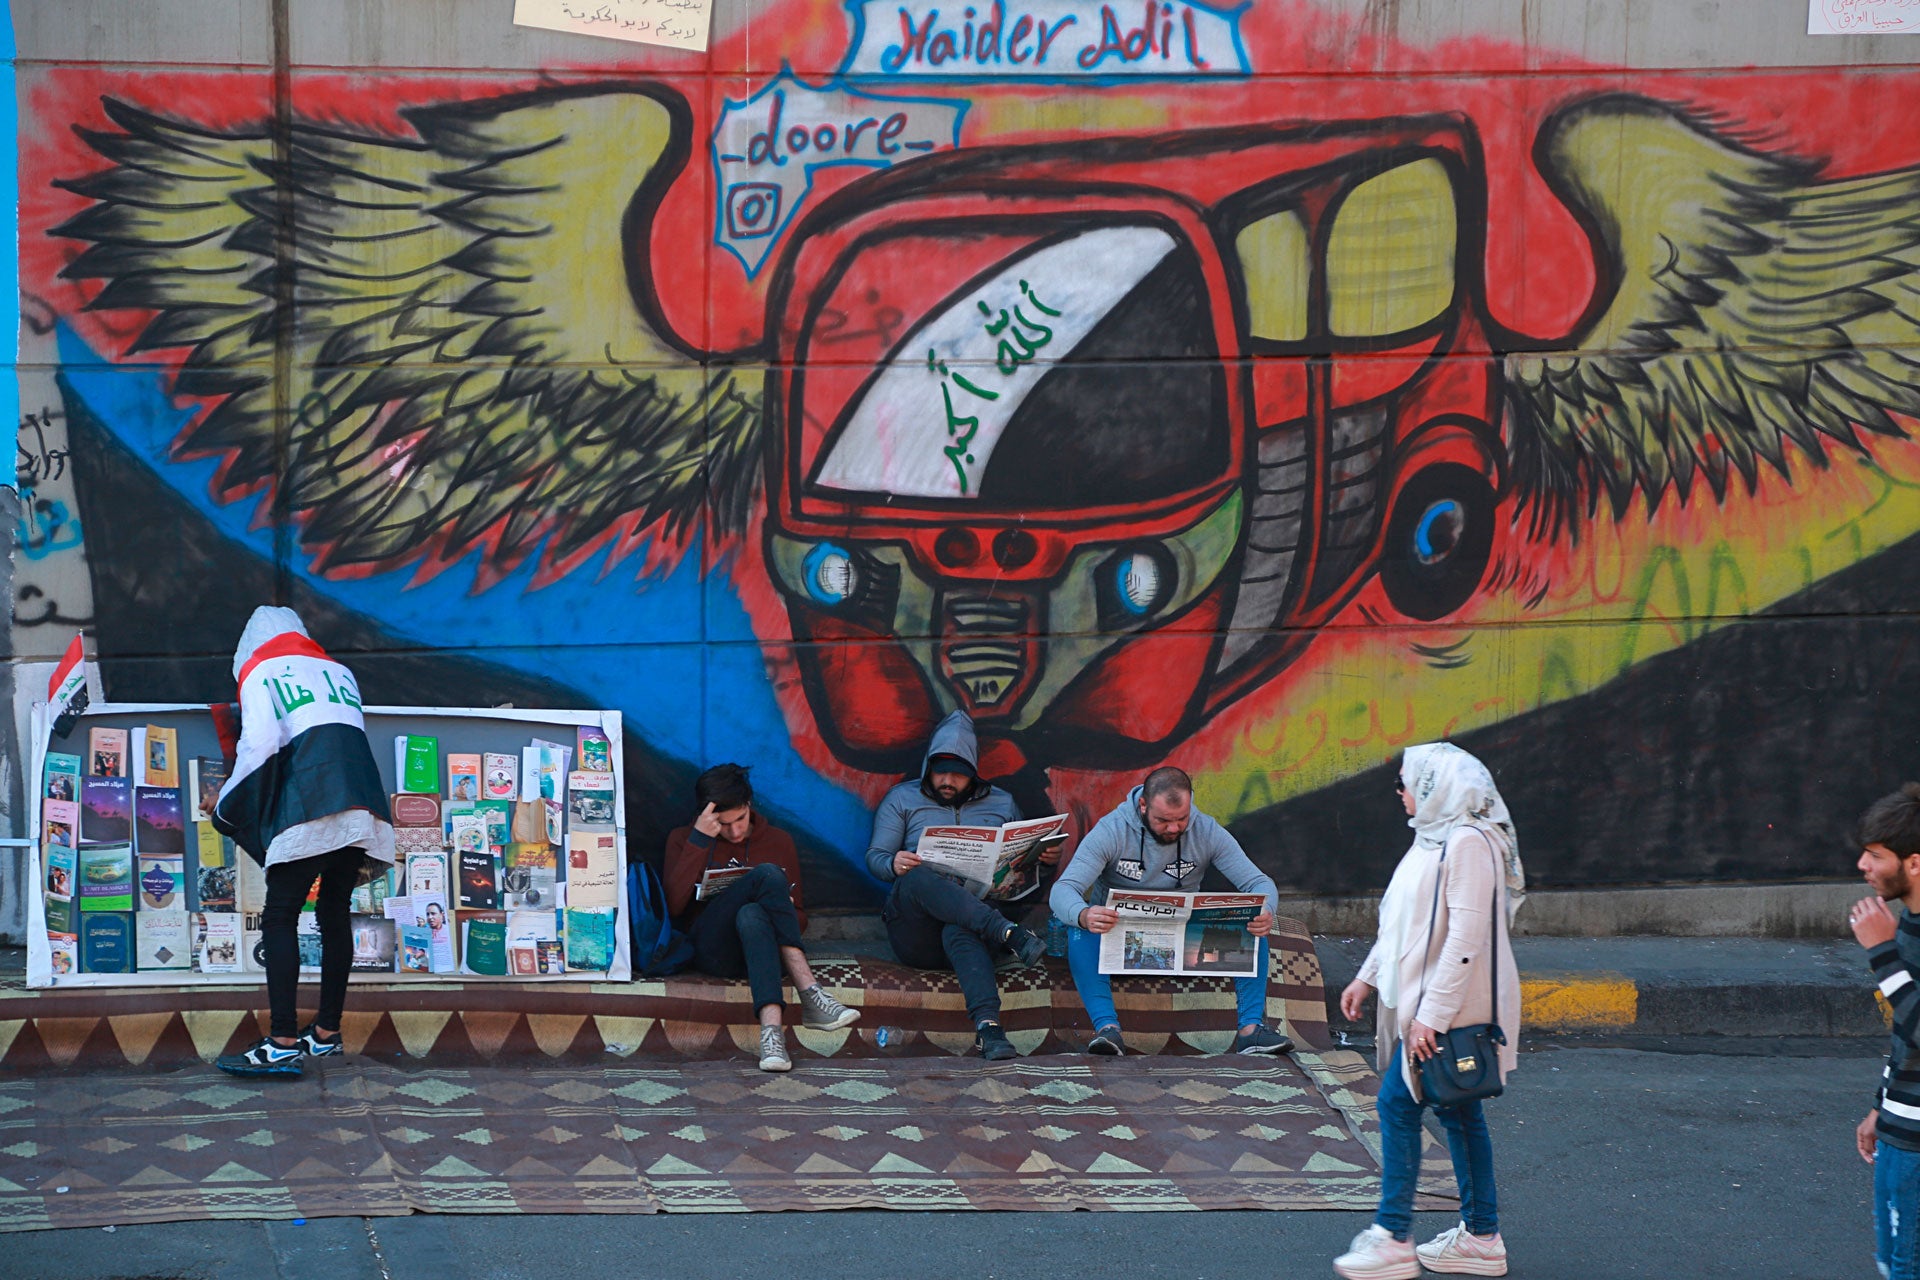 Protesters read copies of newspapers in front of graffiti in Tahrir Square, Baghdad, Iraq, November 20, 2019.